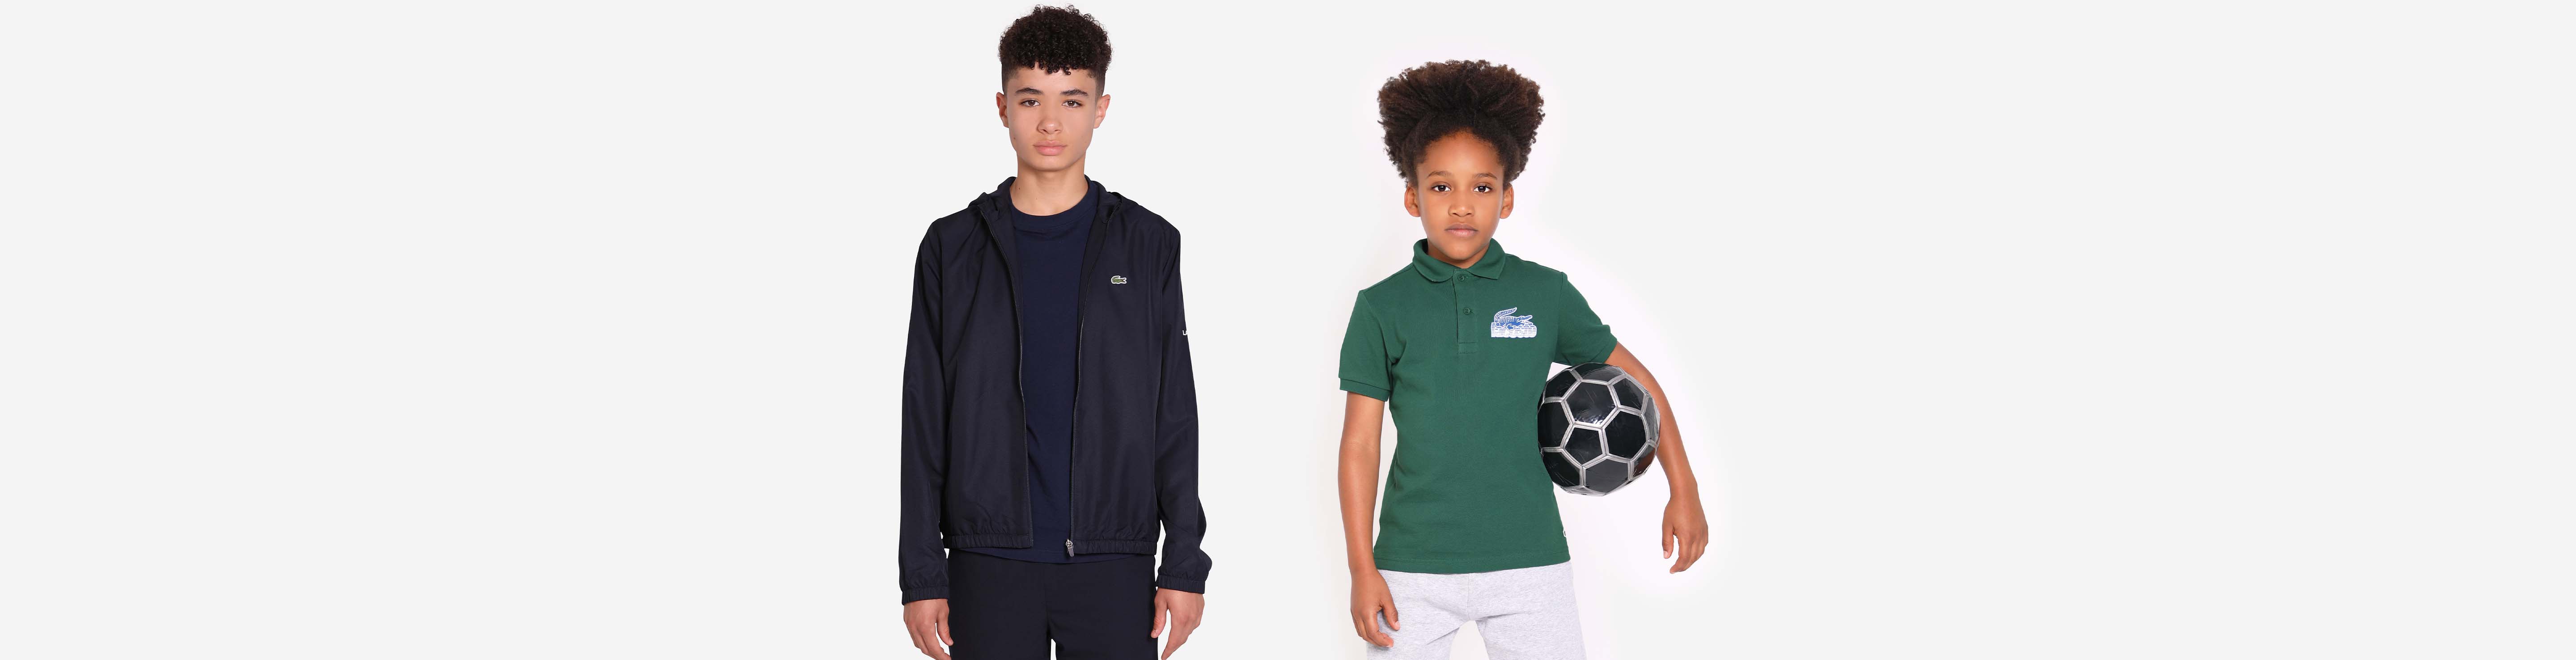 Lacoste Kids Clothes | Clothing